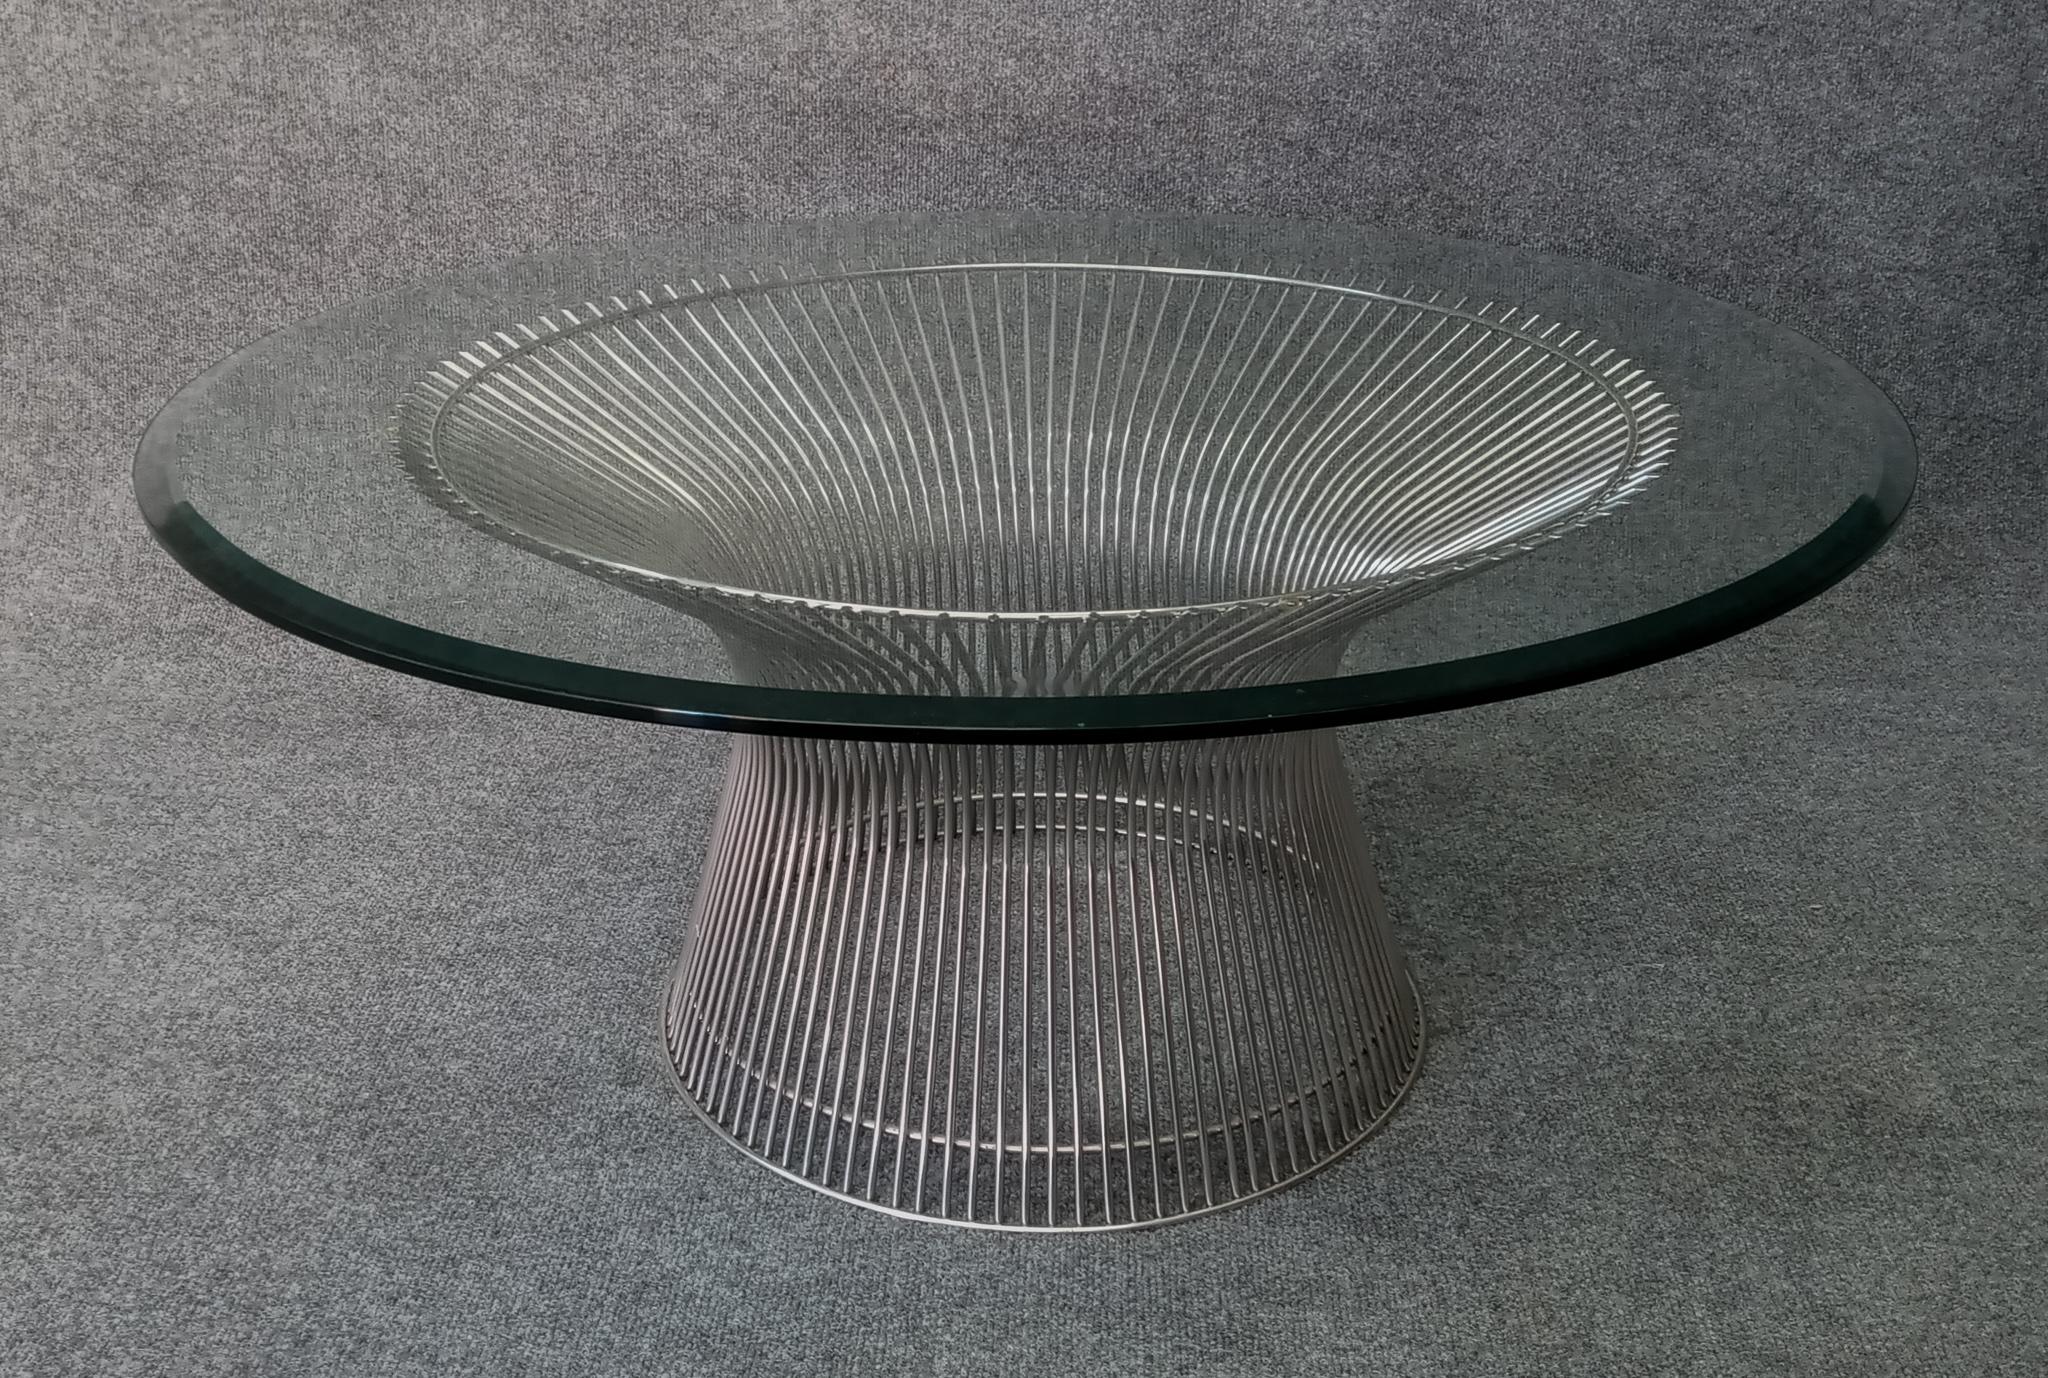 A superb contemporary example of the fabulous Platner for Knoll classic & iconic cocktail table, in chromed steel with the original beveled glass top. What makes these tables such a visual delight is the density or closeness of the rods that make up